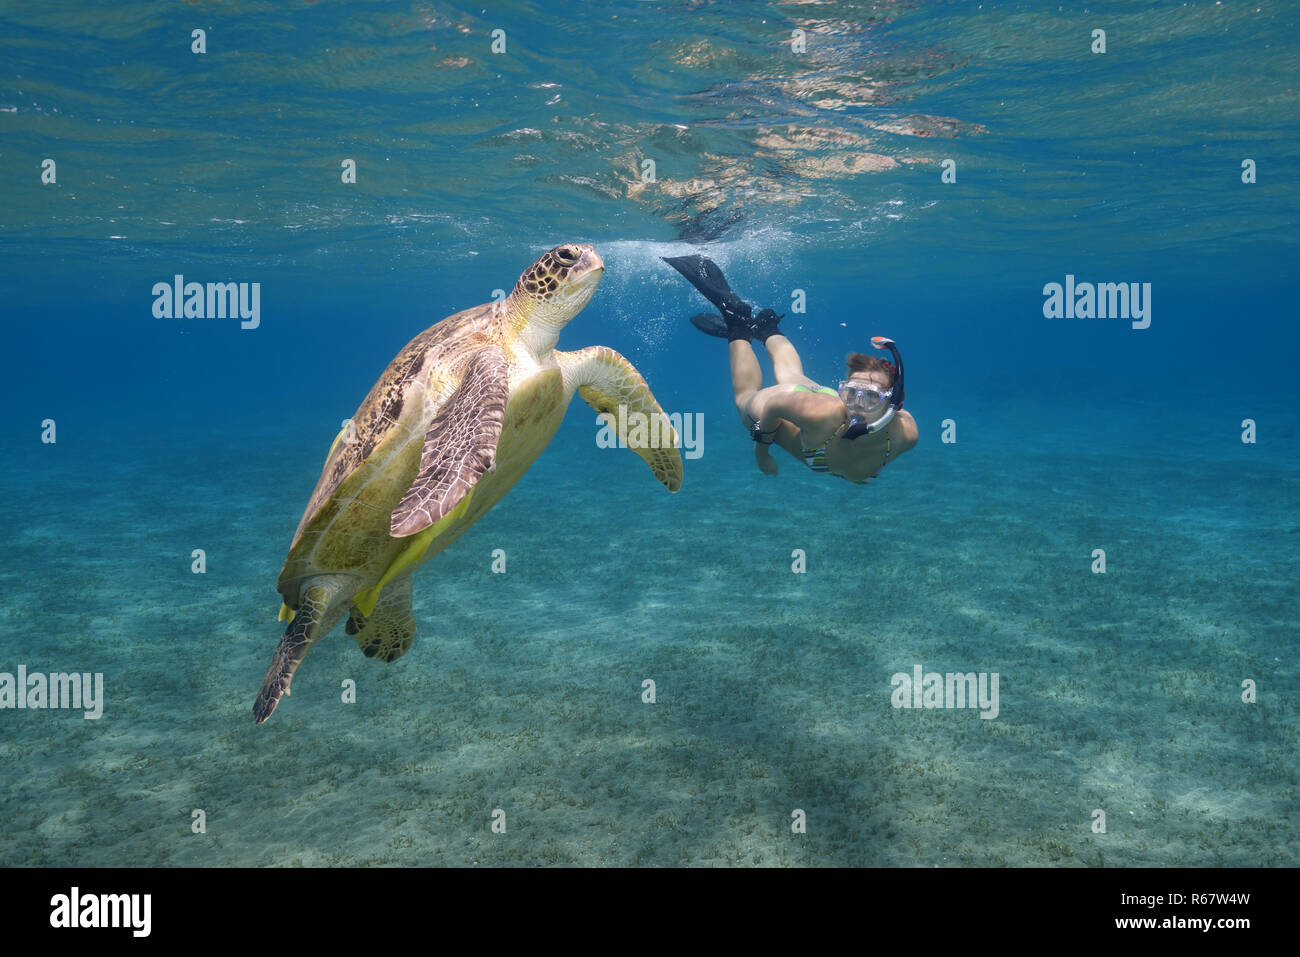 Woman with mask and fins snorkling with Green Sea Turtle (Chelonia mydas), Red Sea, Abu Dabab, Marsa Alam, Egypt Stock Photo